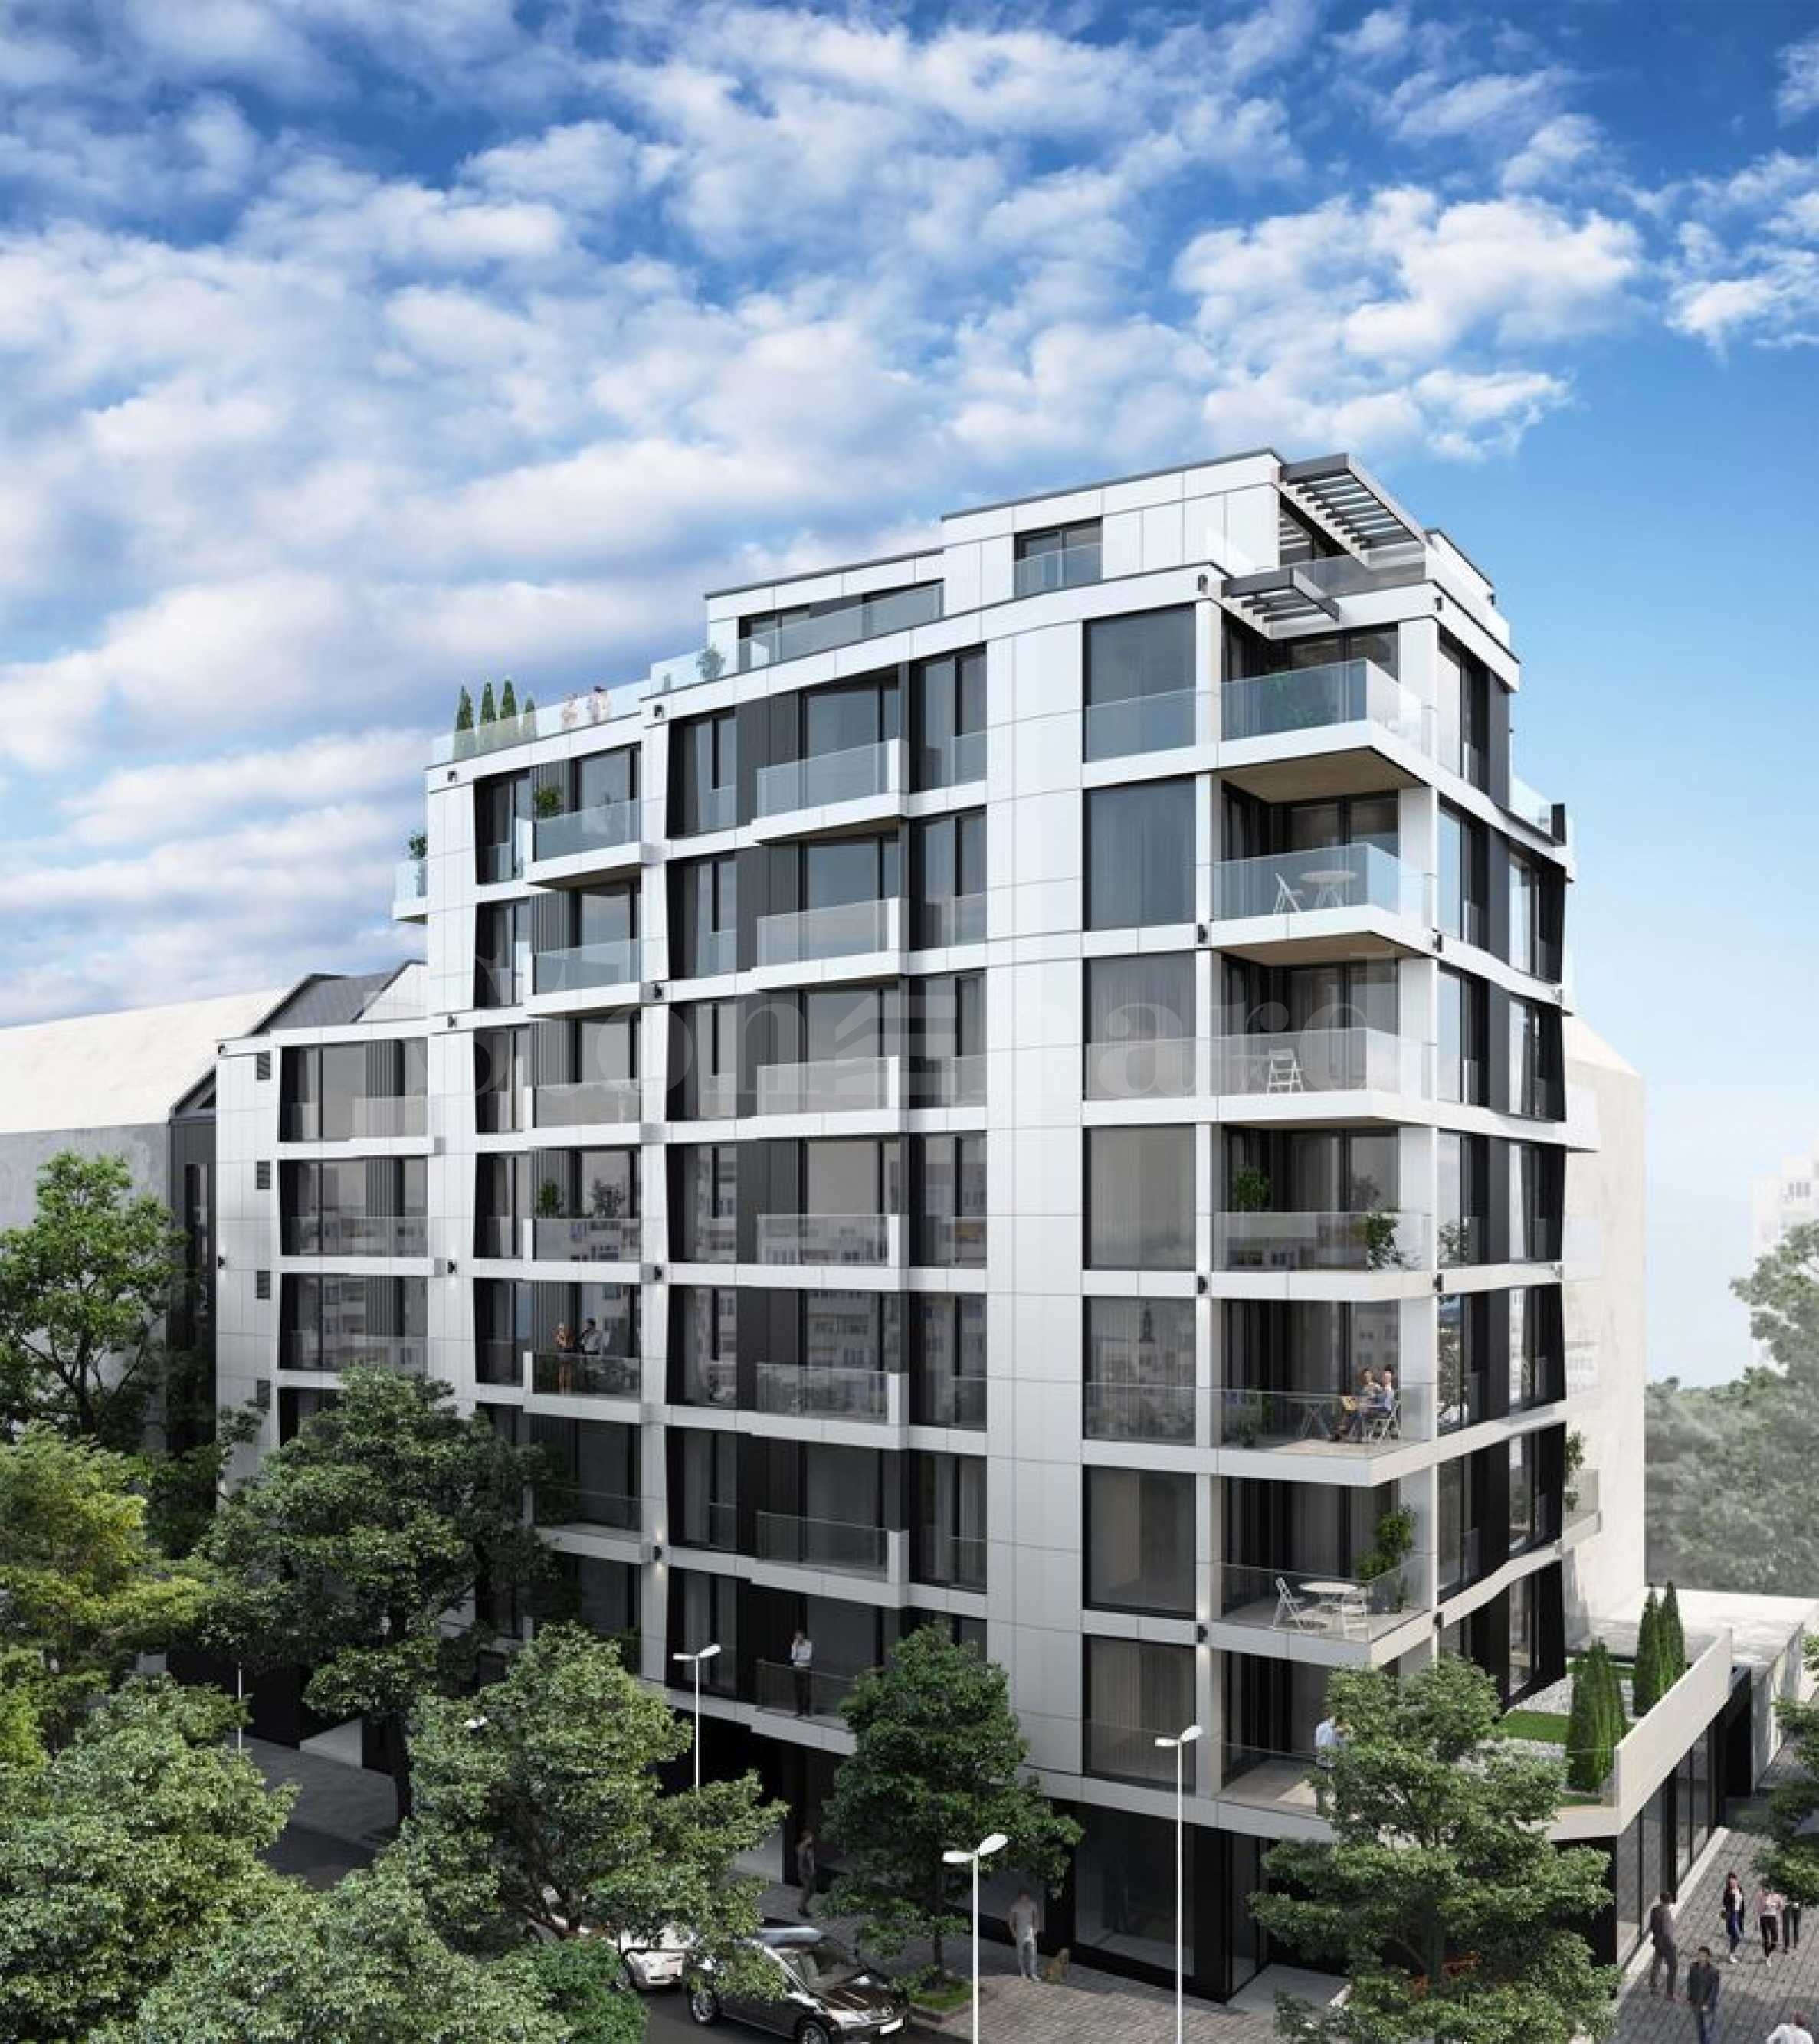 Residential building with different types of apartments in Strelbishte district2 - Stonehard